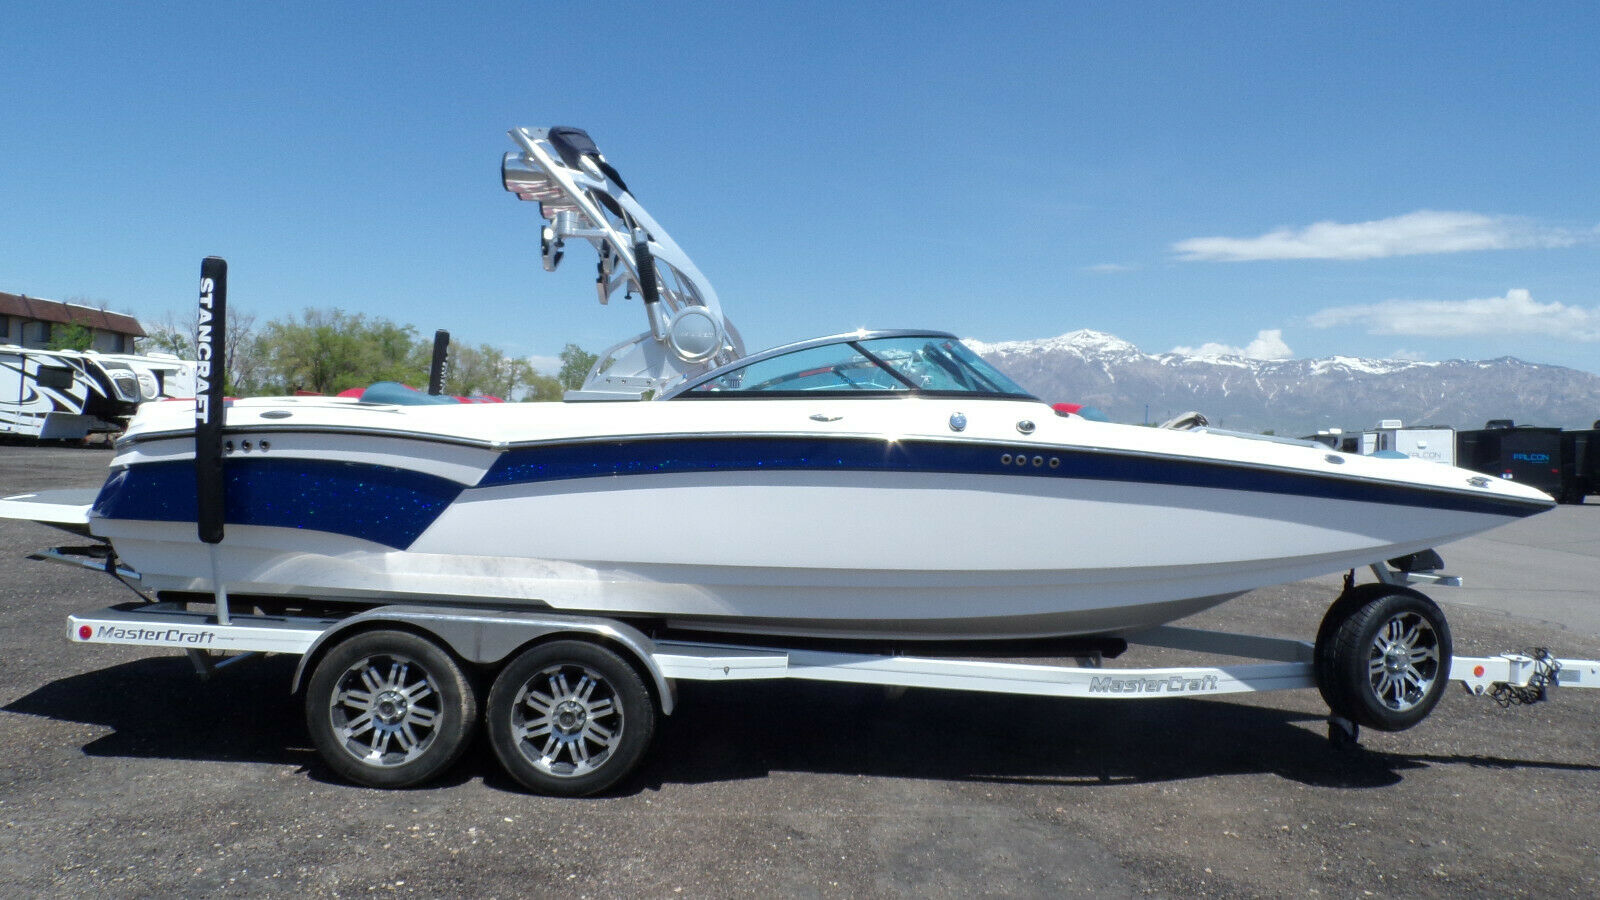 Mastercraft X Star 2013 for sale for $100 - Boats-from-USA.com